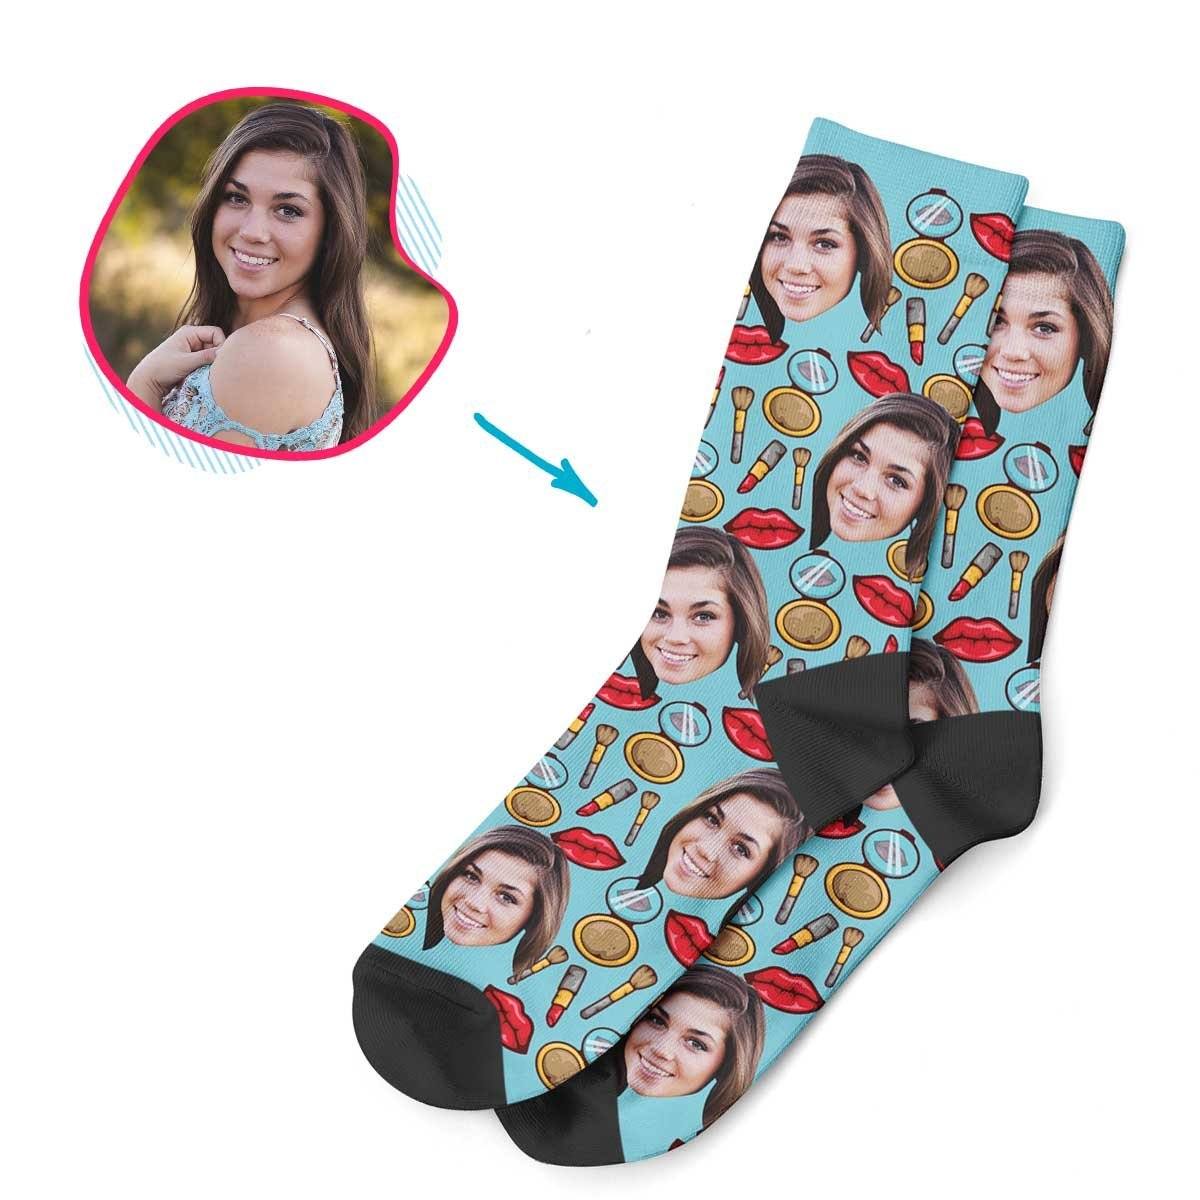 Blue Makeup personalized socks with photo of face printed on them